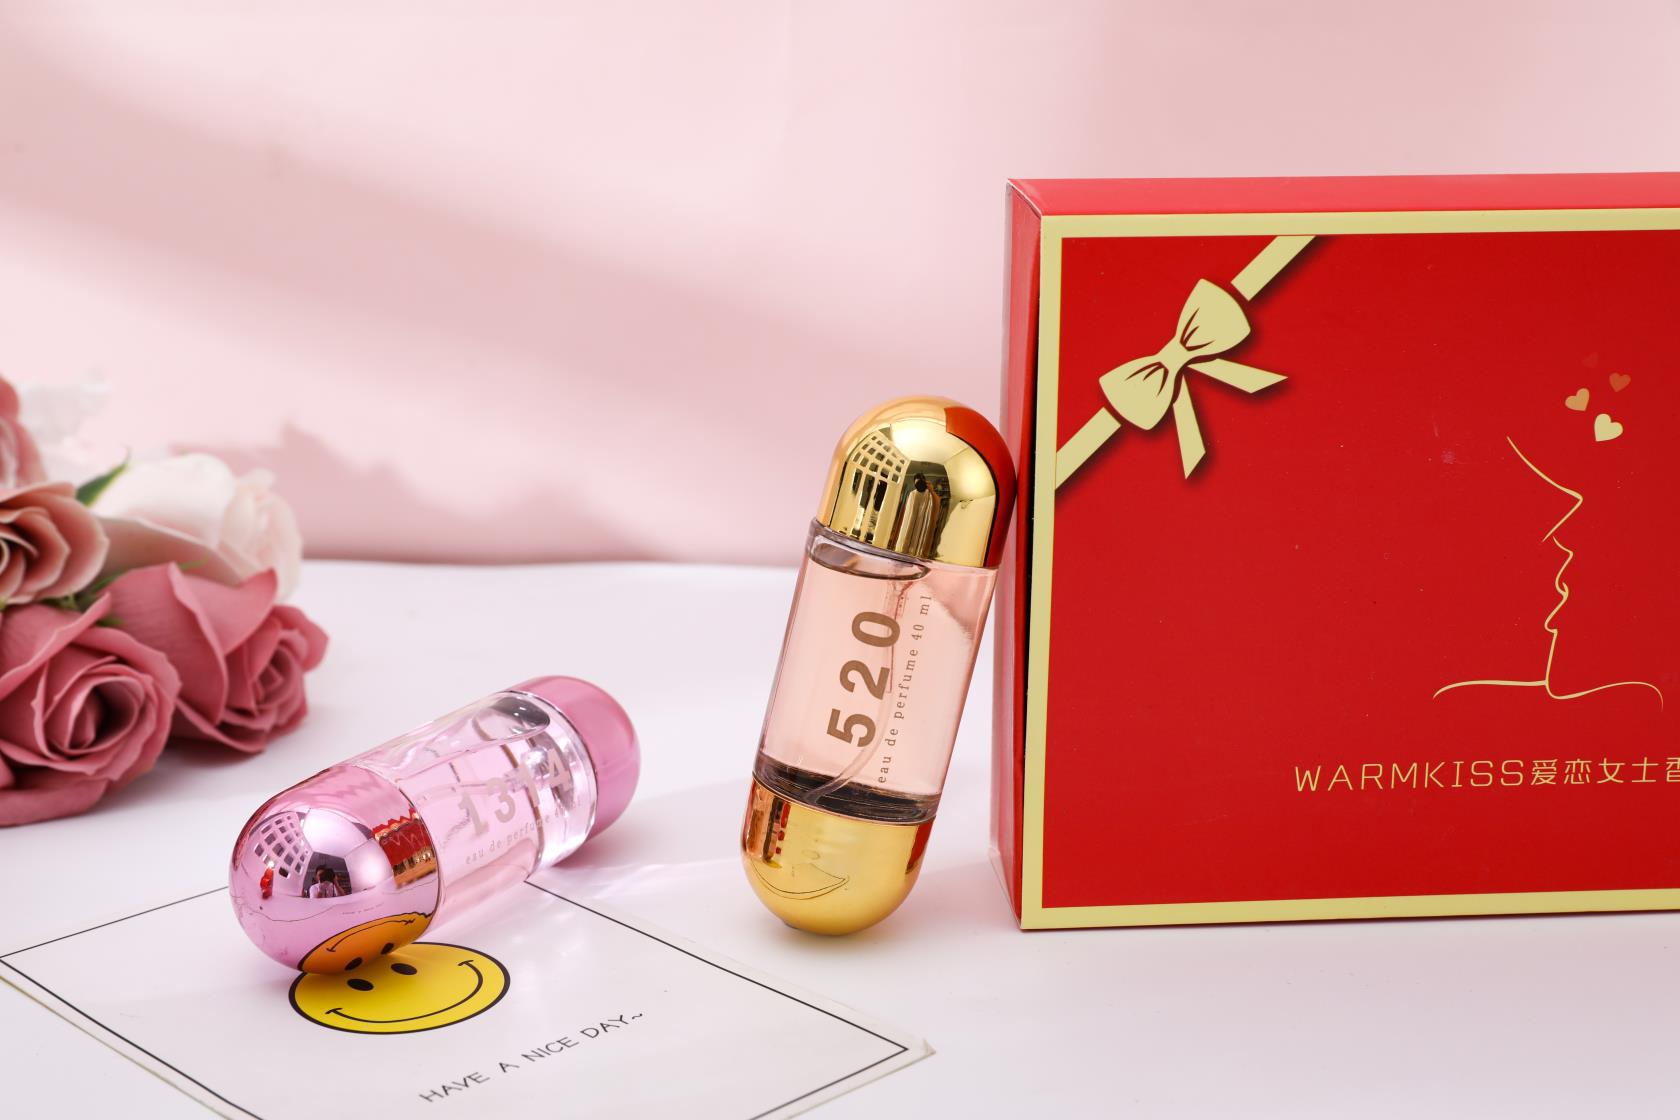 Valentine's Day Warmkiss Love Perfume for Women Gift Box Fresh Alight Fragrance for Girlfriend Holiday Gift Wholesale